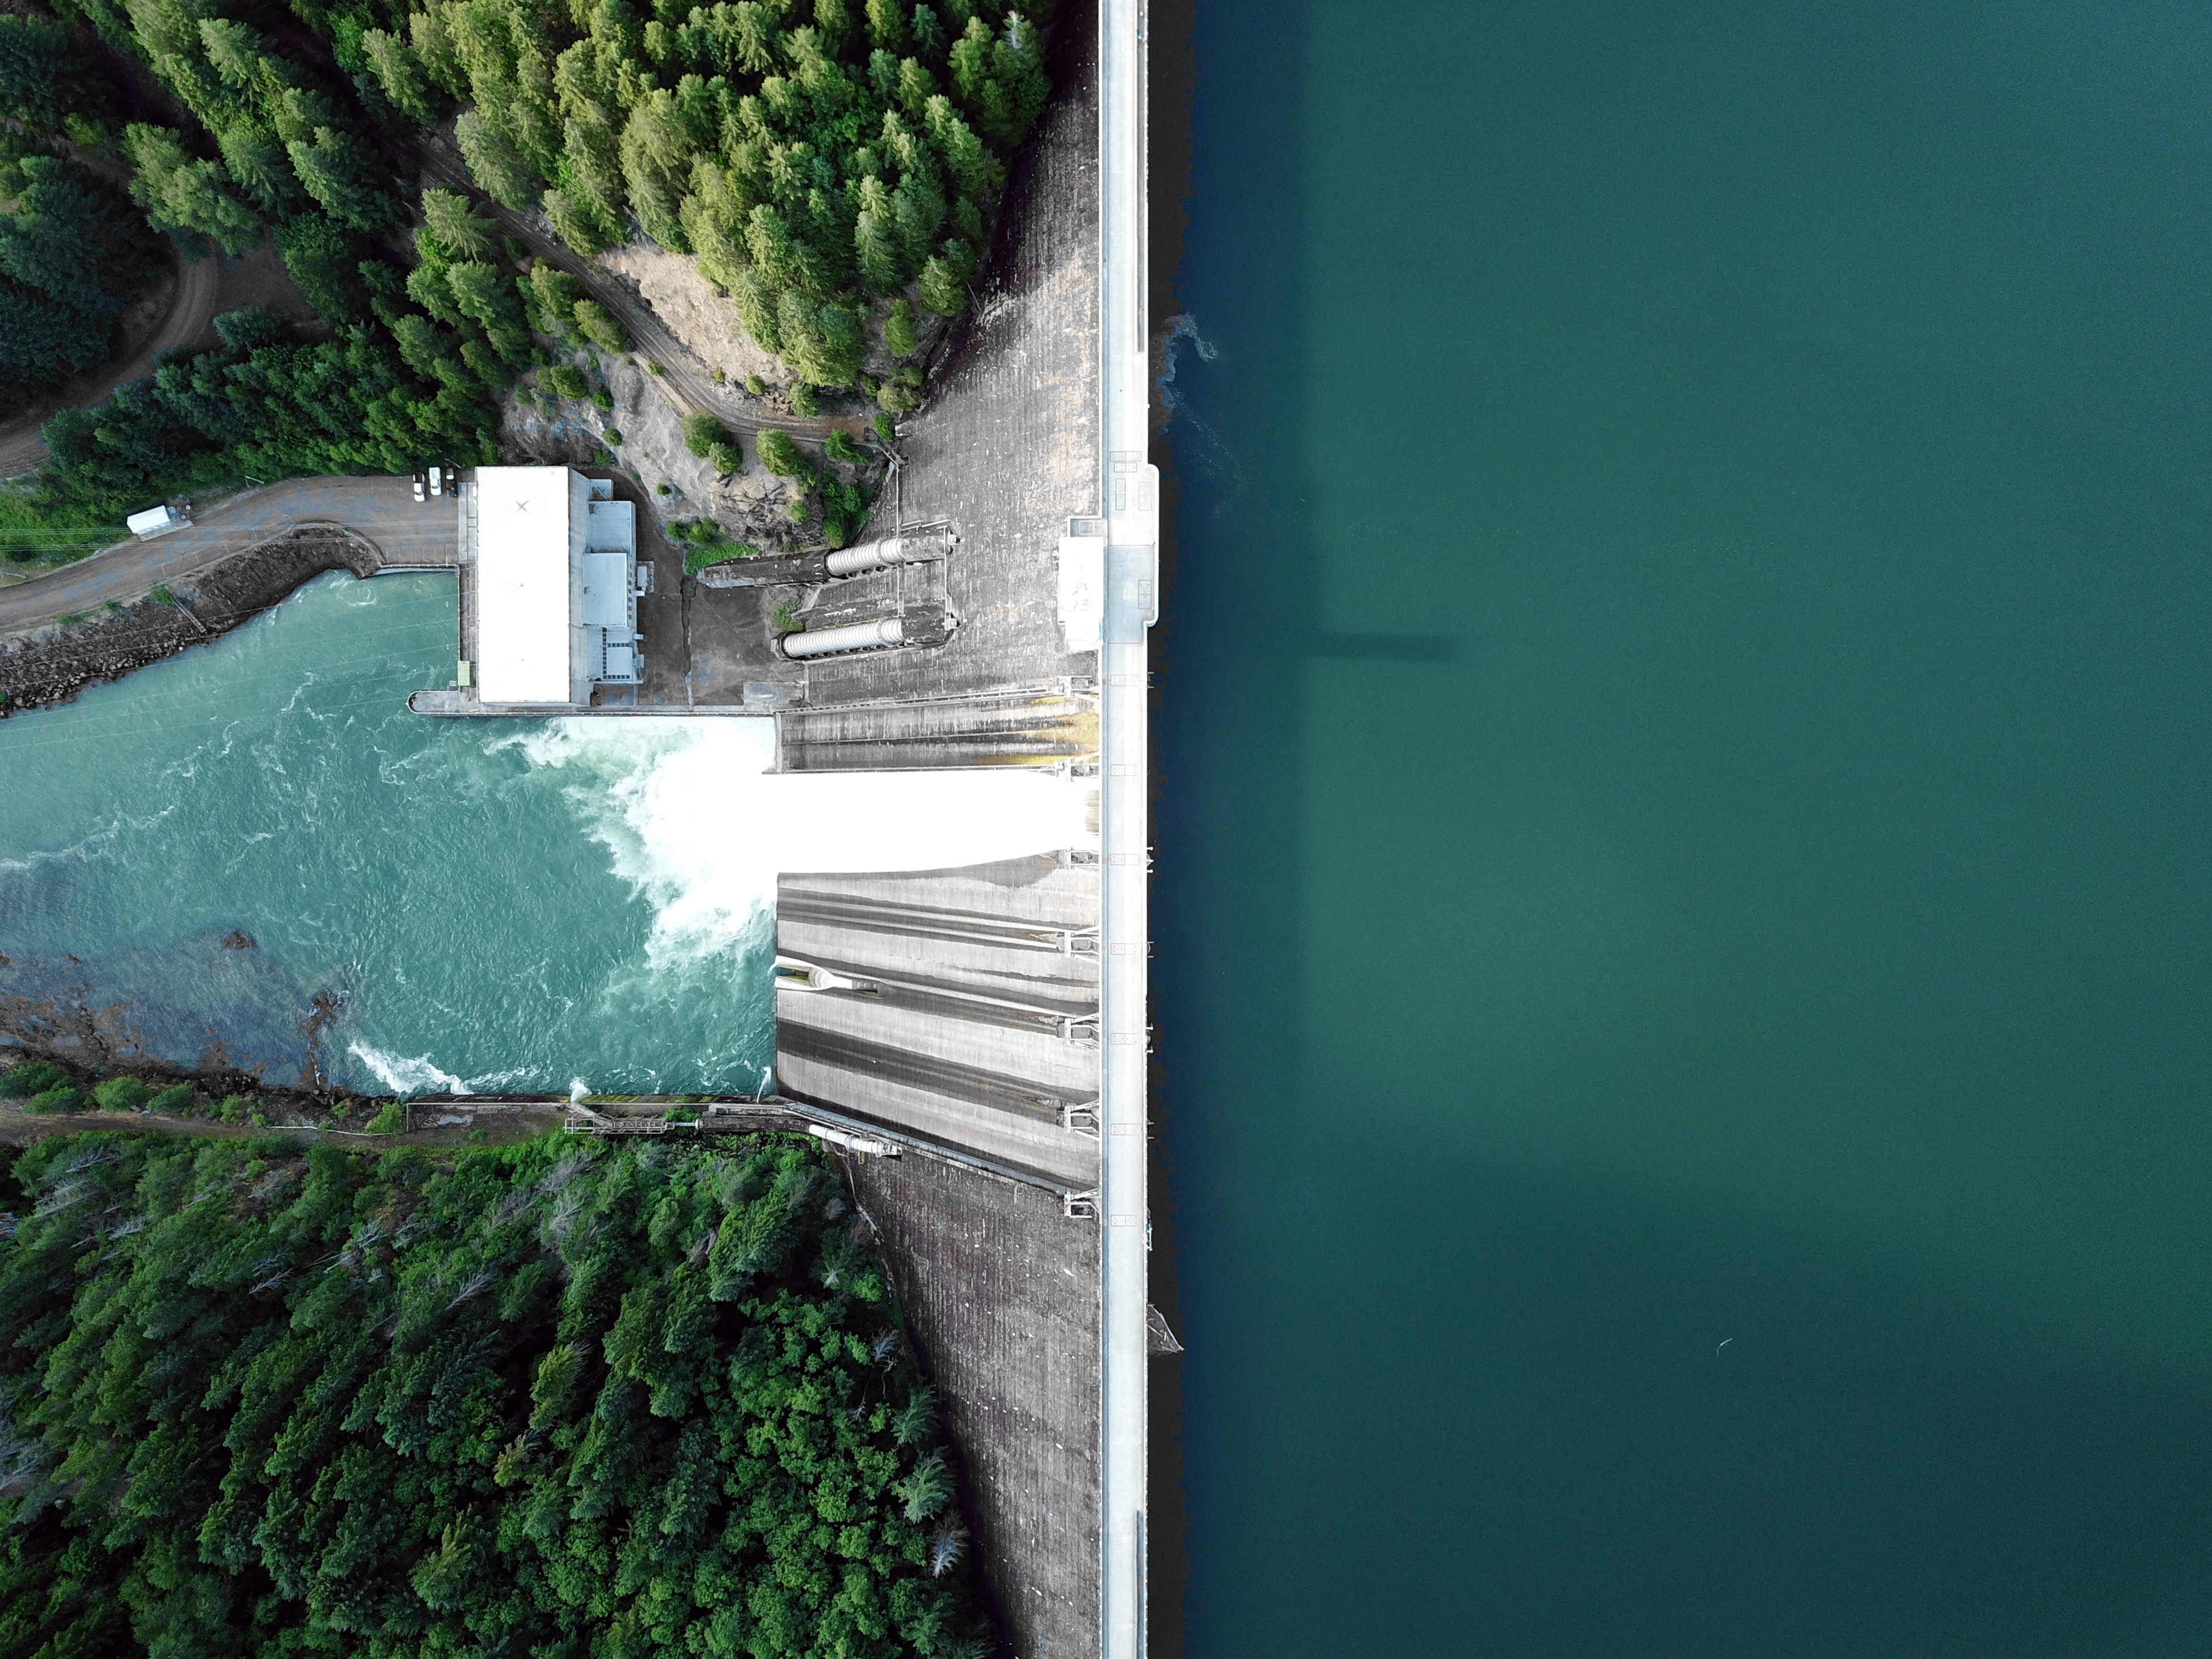 Drone image from above a large water dam